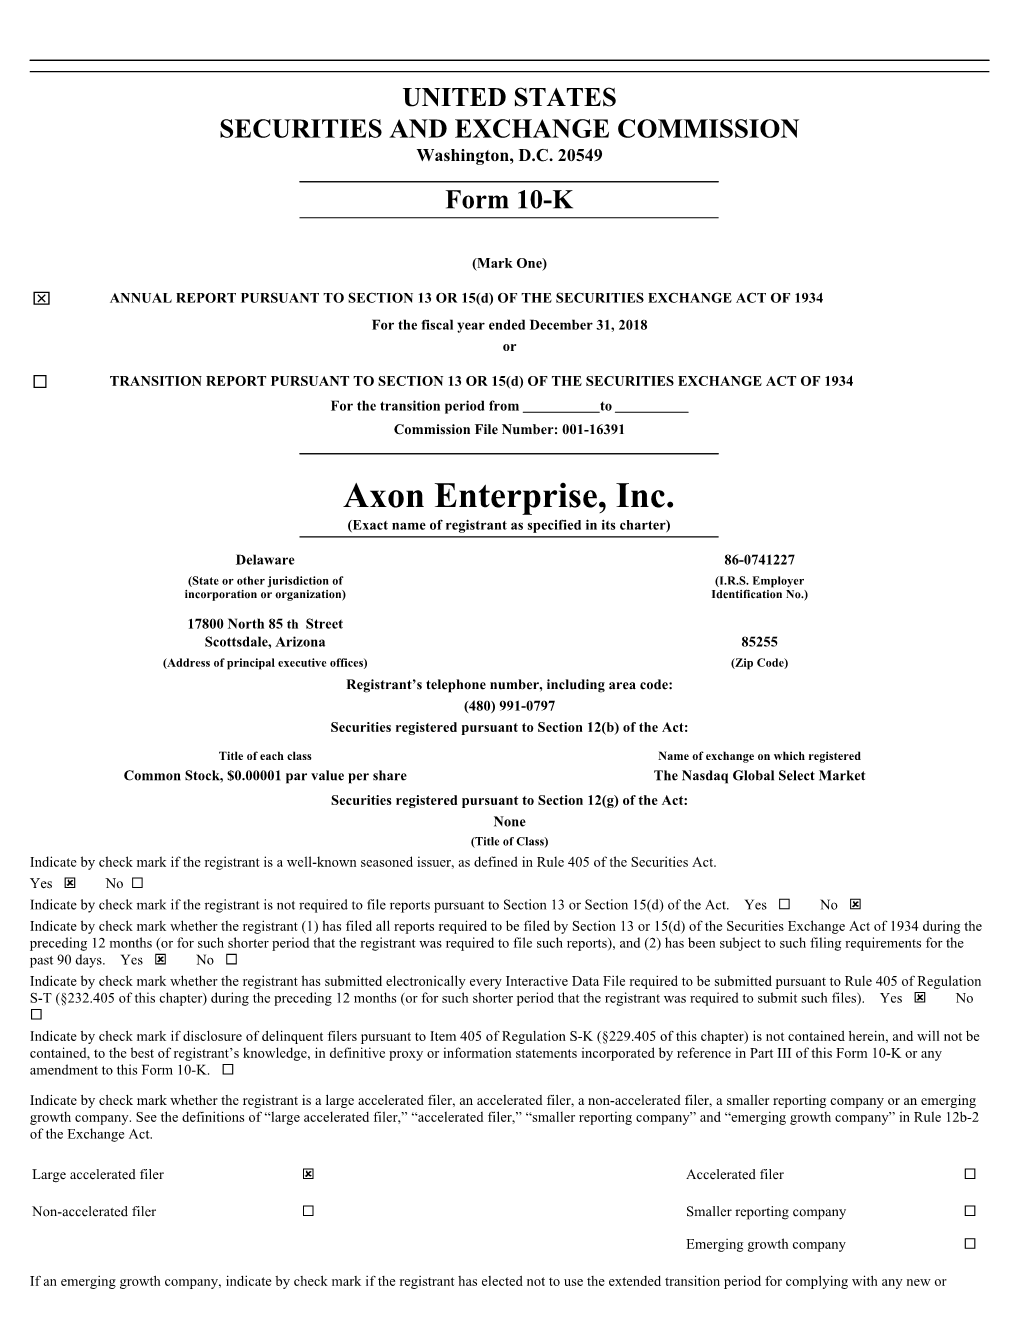 Axon Enterprise, Inc. (Exact Name of Registrant As Specified in Its Charter)